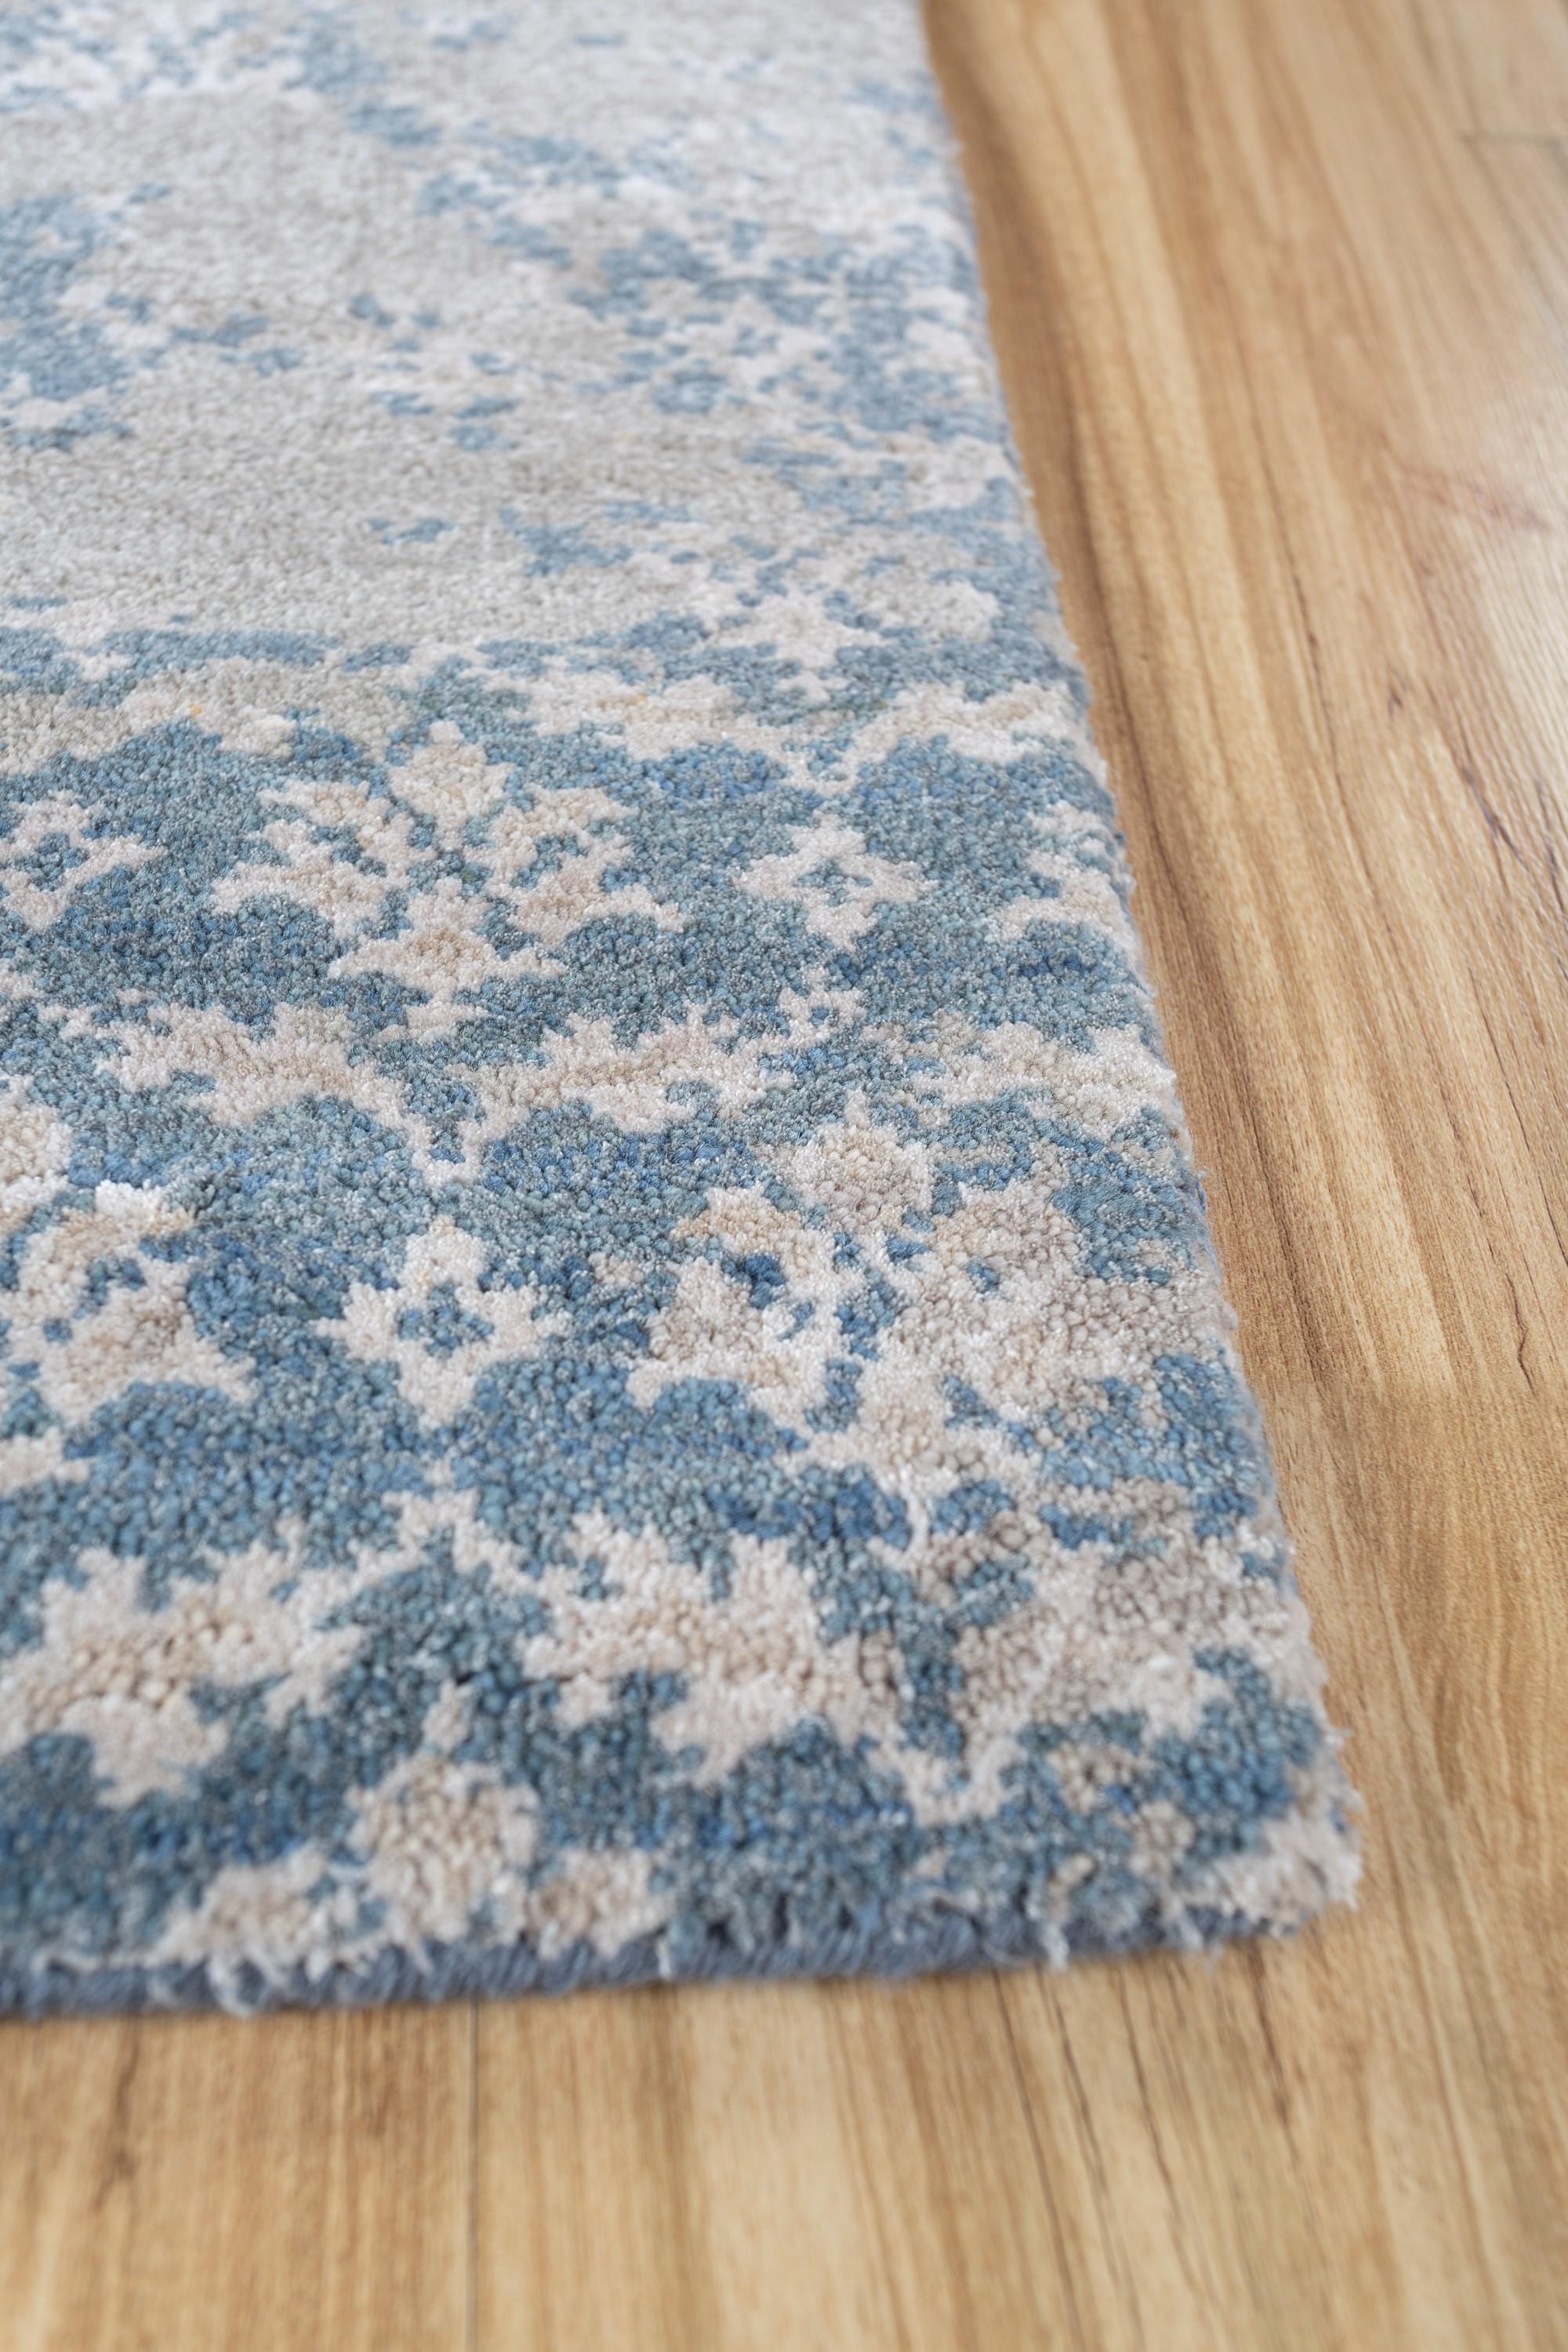 Dive into the enchanting depths of this hand-knotted rug . Its ground color, faded denim, and classic gray border create a canvas inspired by the unnoticed beauty of evolving experiences. Much like the mystery of an unfolding journey, every pattern